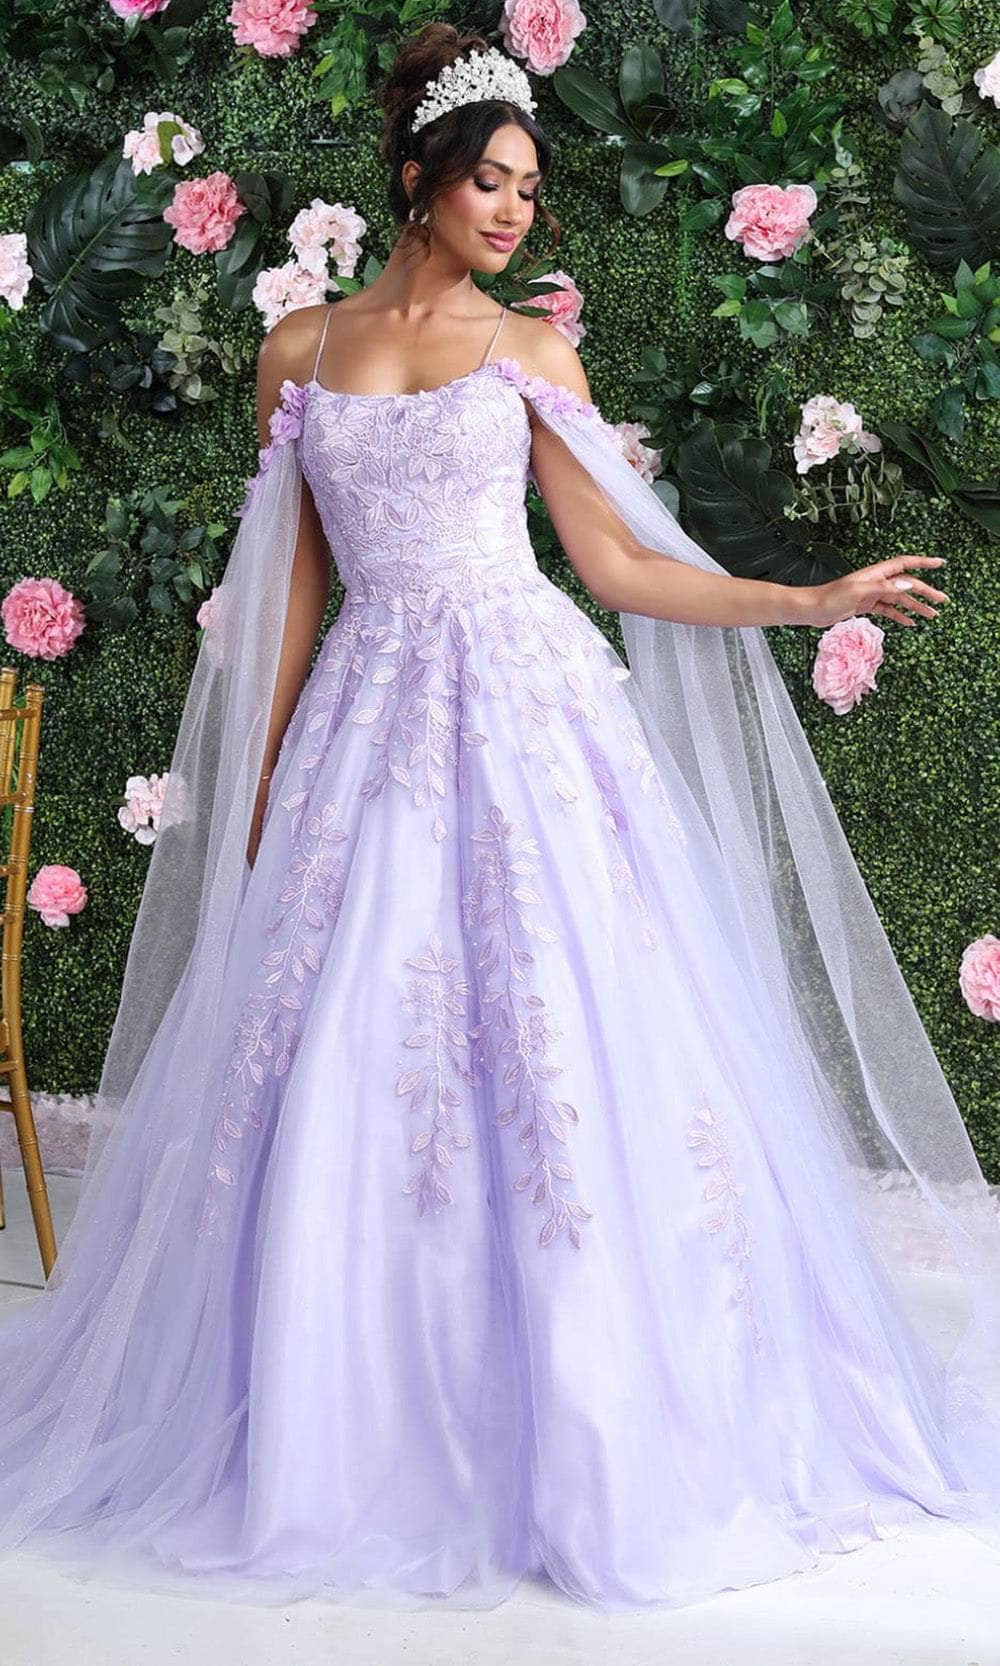 May Queen LK191 - Floral Detailed Sleeve Gown Prom Dresses 4 / Lilac